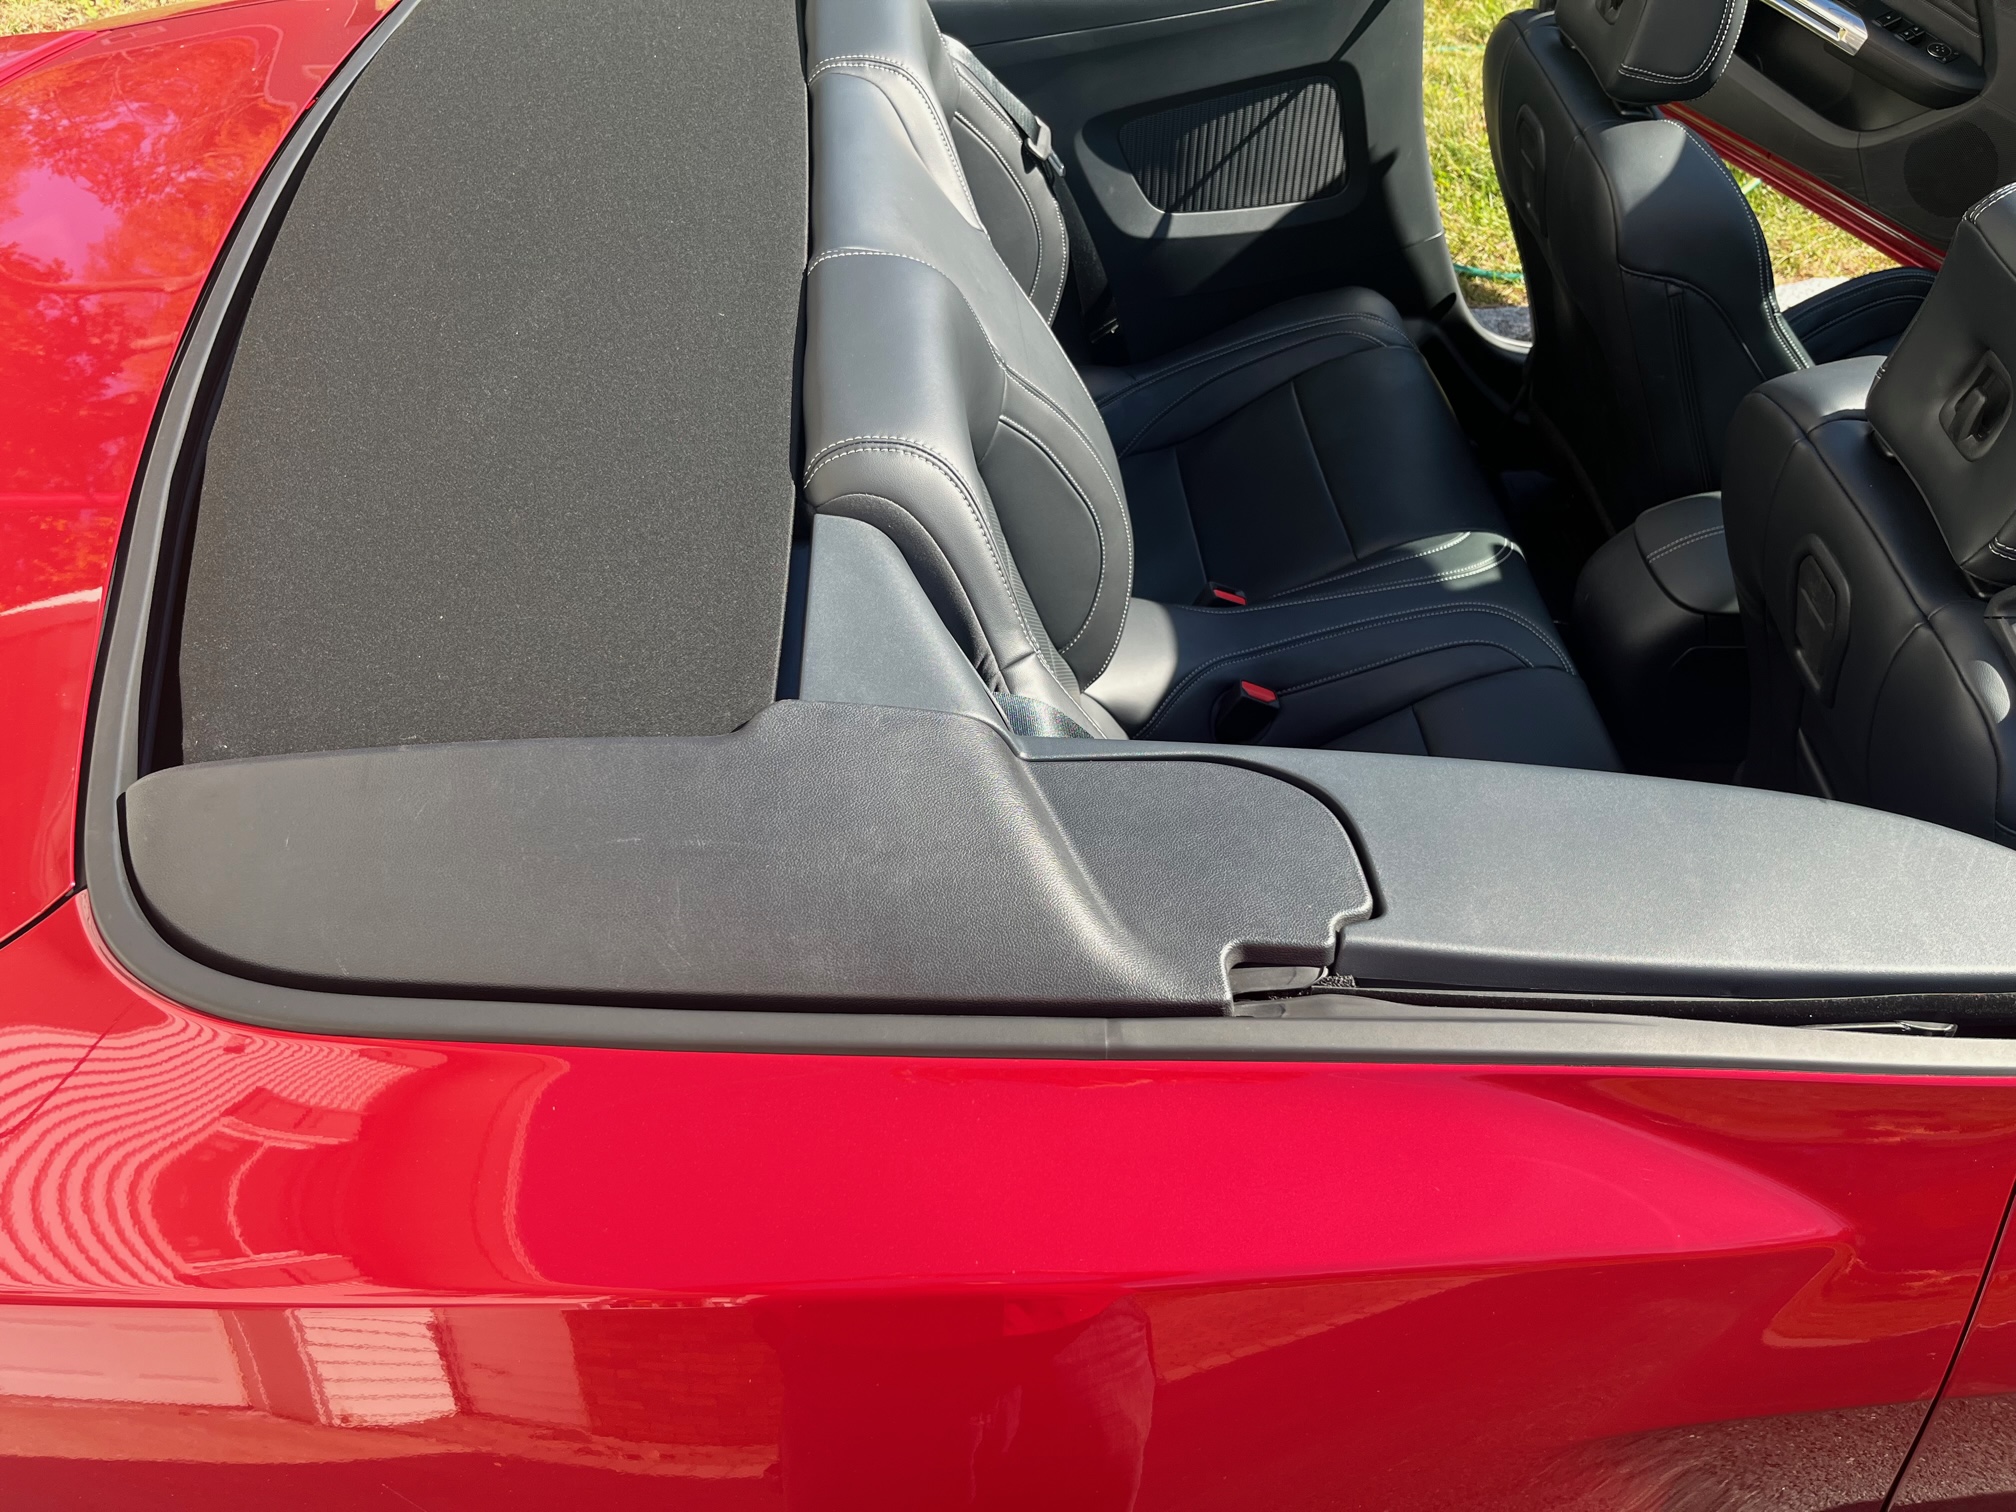 S650 Mustang Convertible plastic cover inserts img_9346-